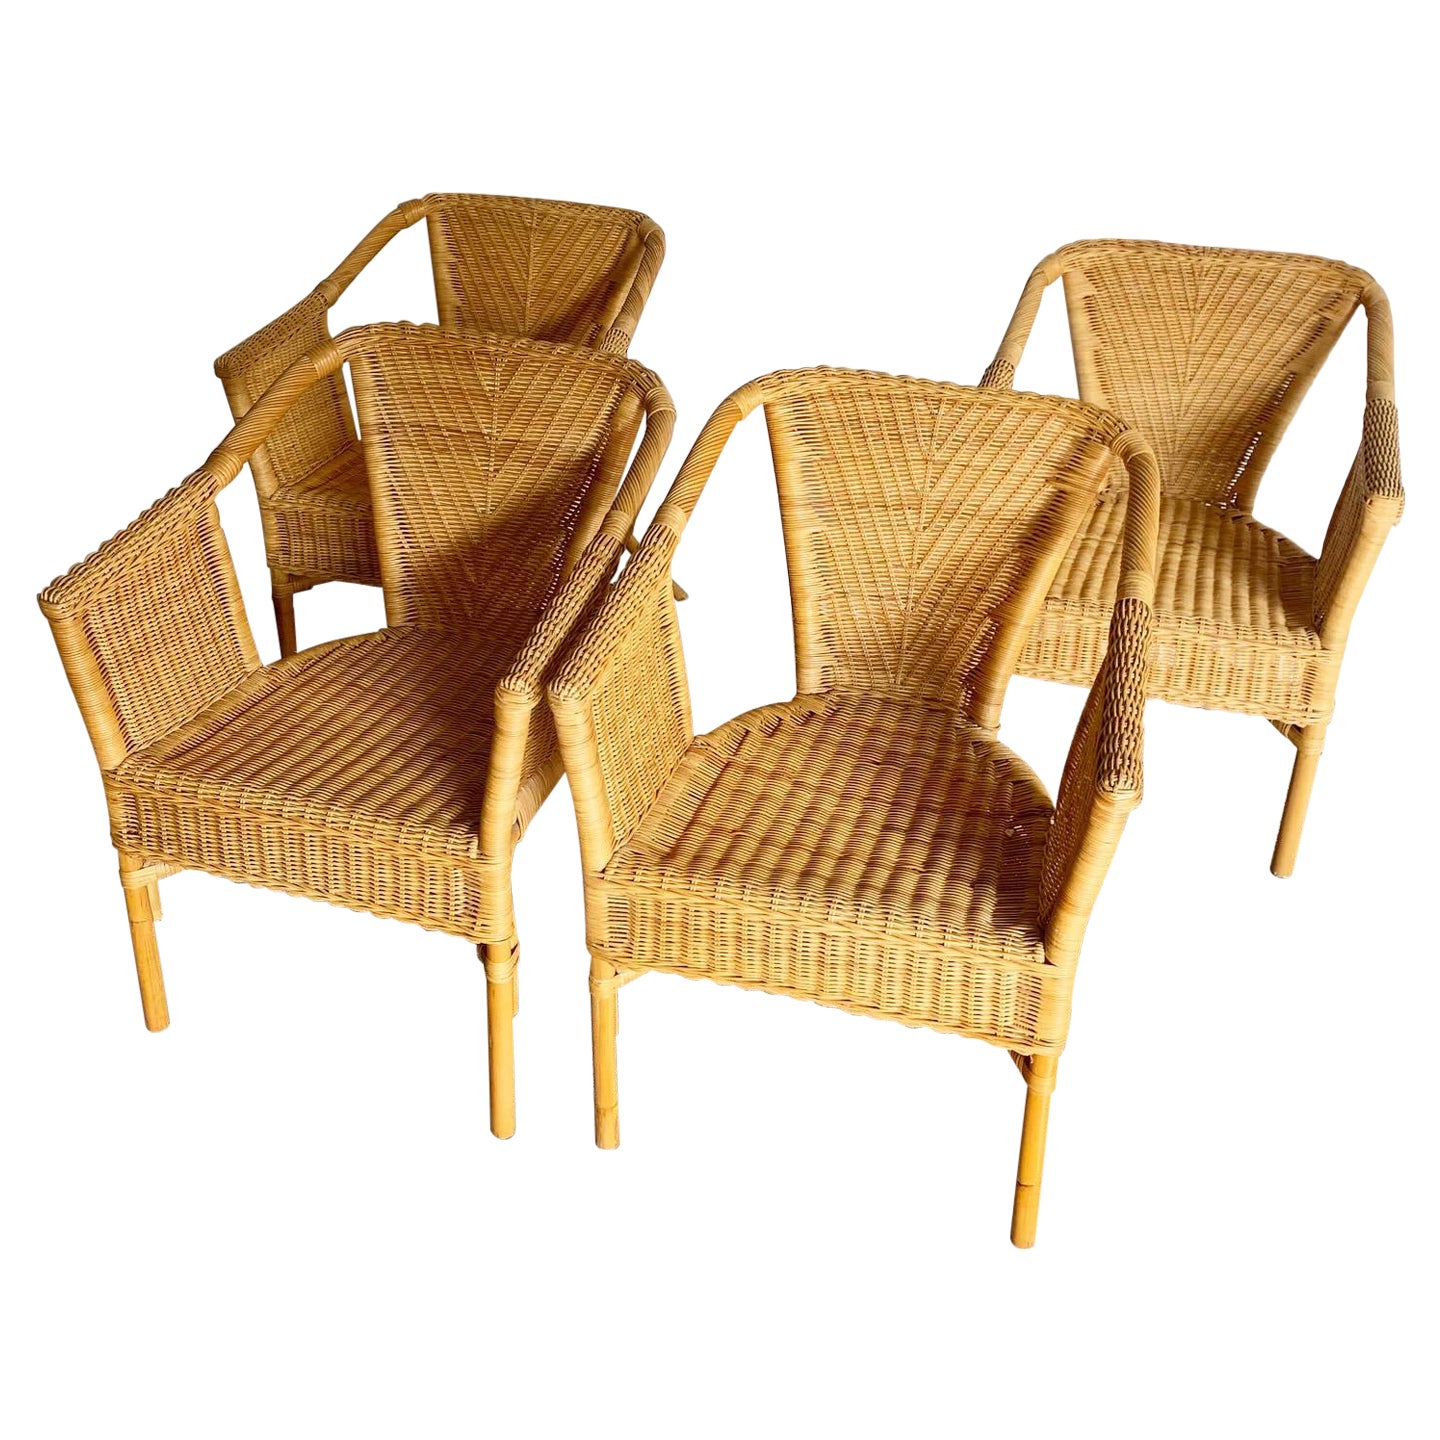 Boho Chic Wicker and Rattan Dining Arm Chairs - Set of 4 For Sale